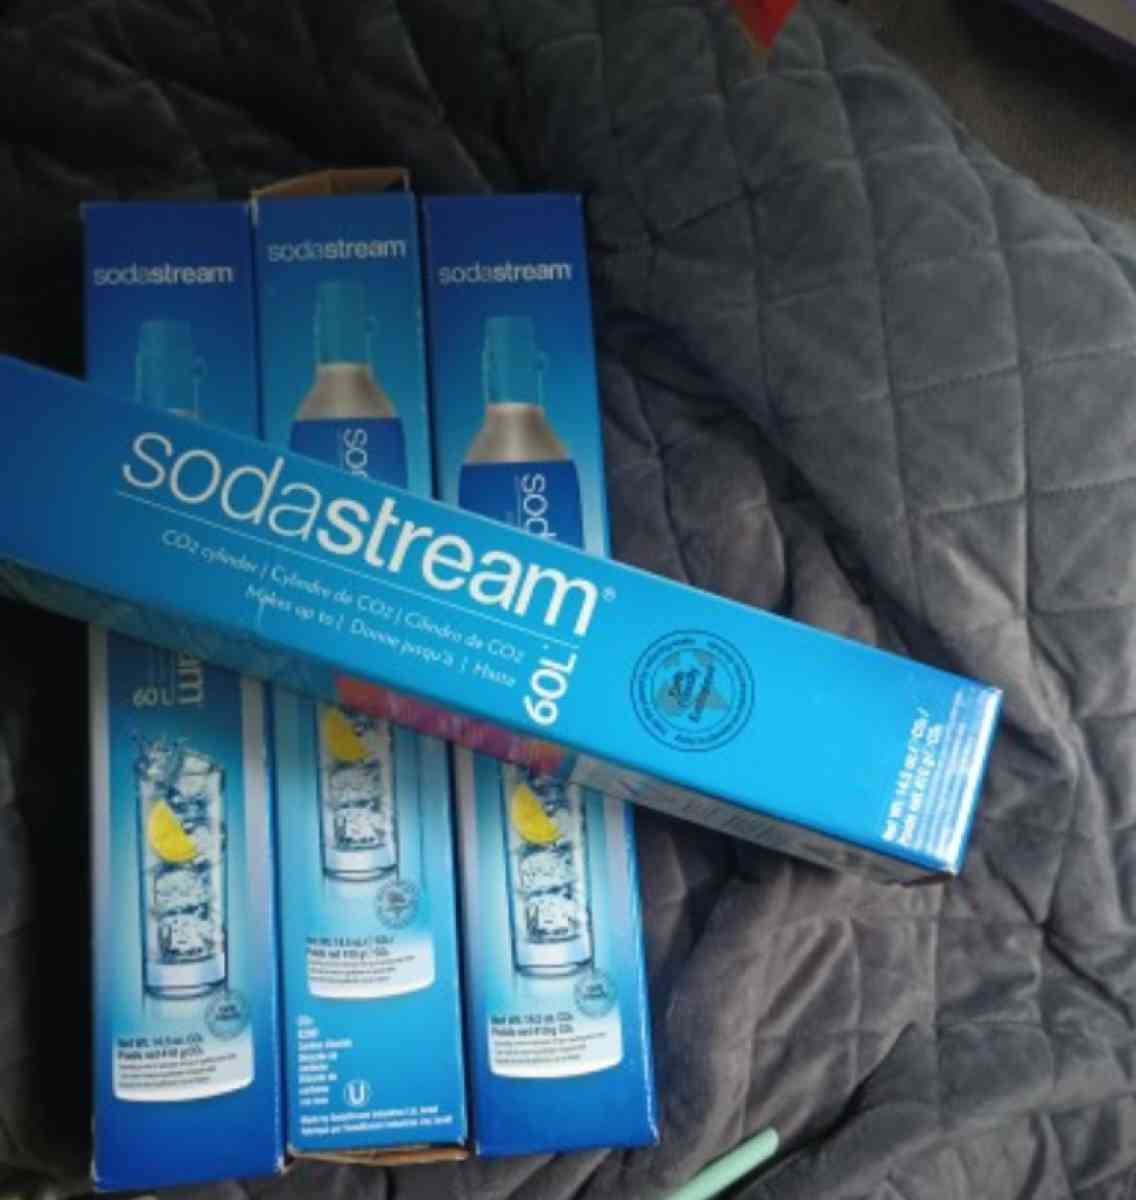 sodastream 60ML Co2 canisters